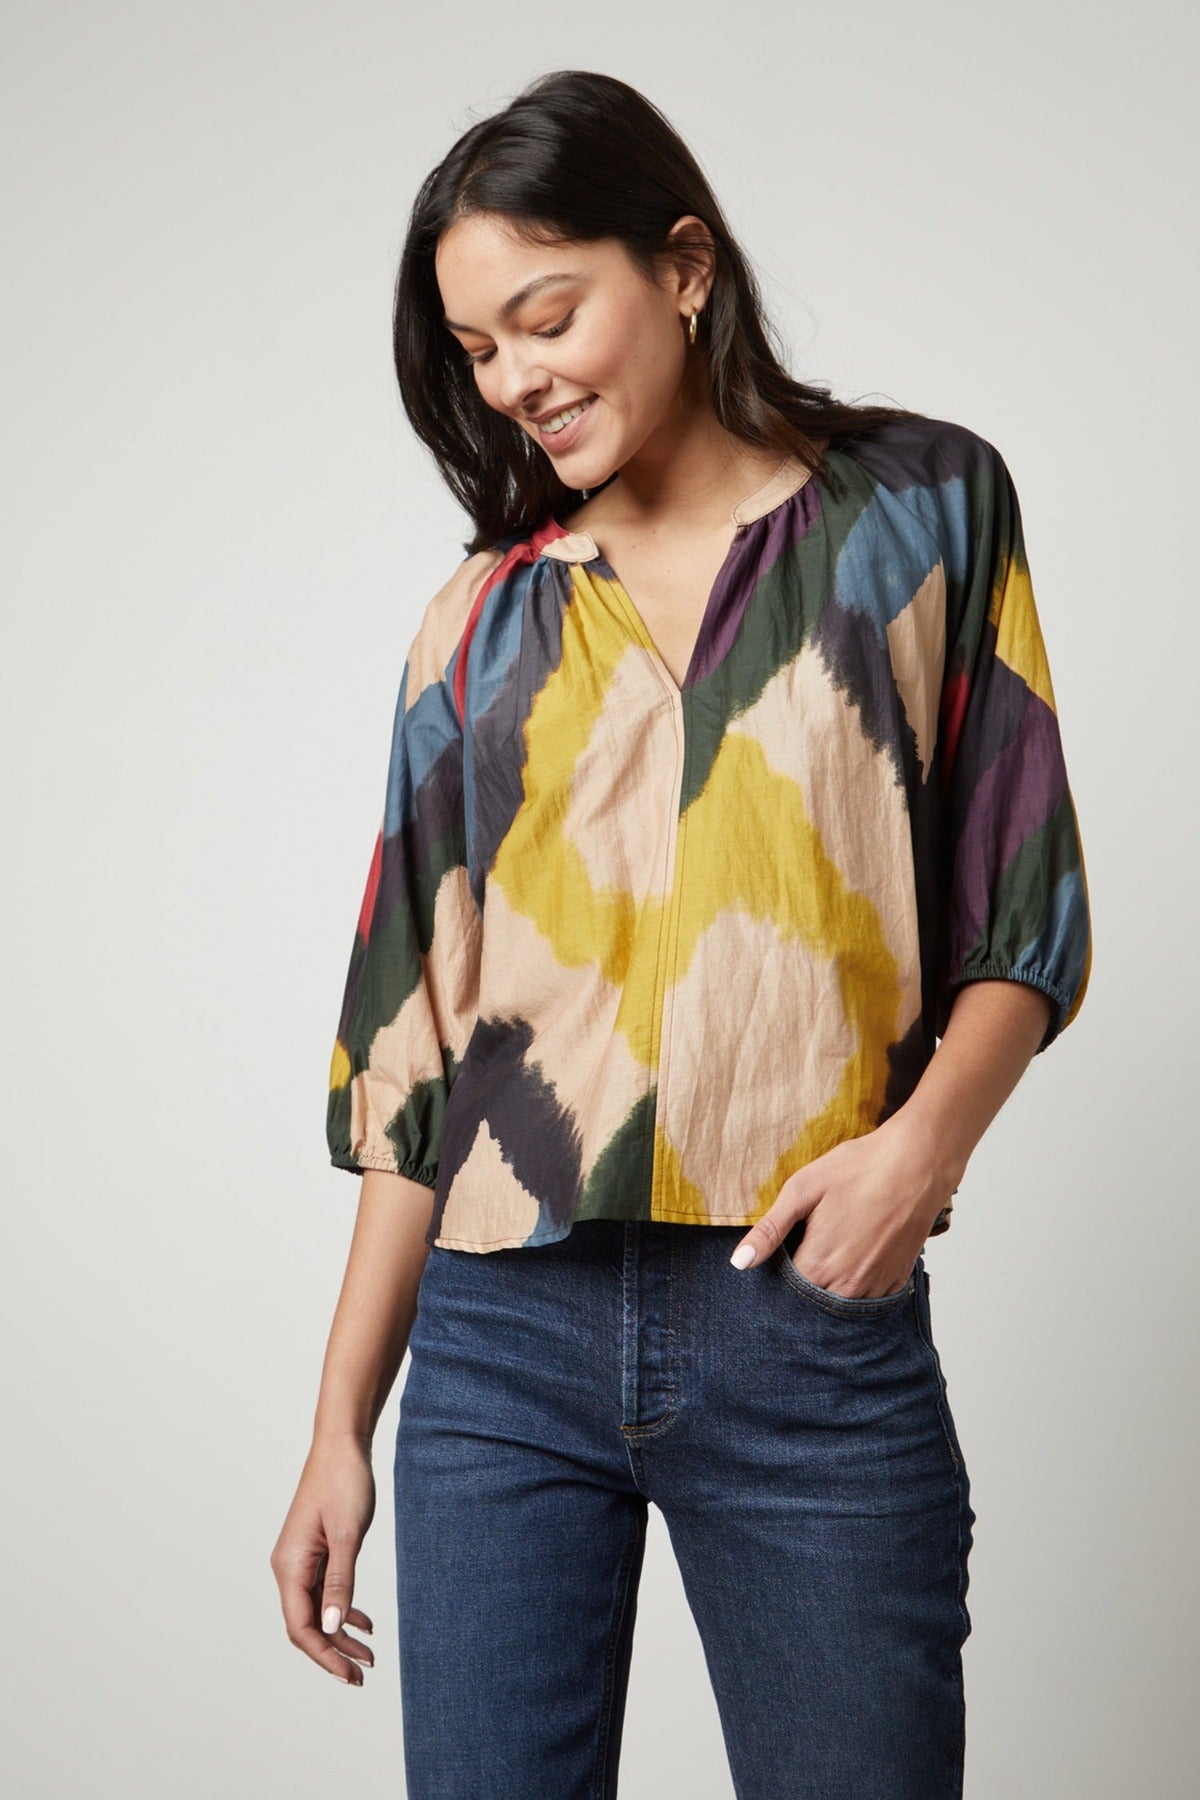 A woman wearing a Velvet by Graham & Spencer LIZETTE PRINTED BOHO TOP and jeans.-26883581837505